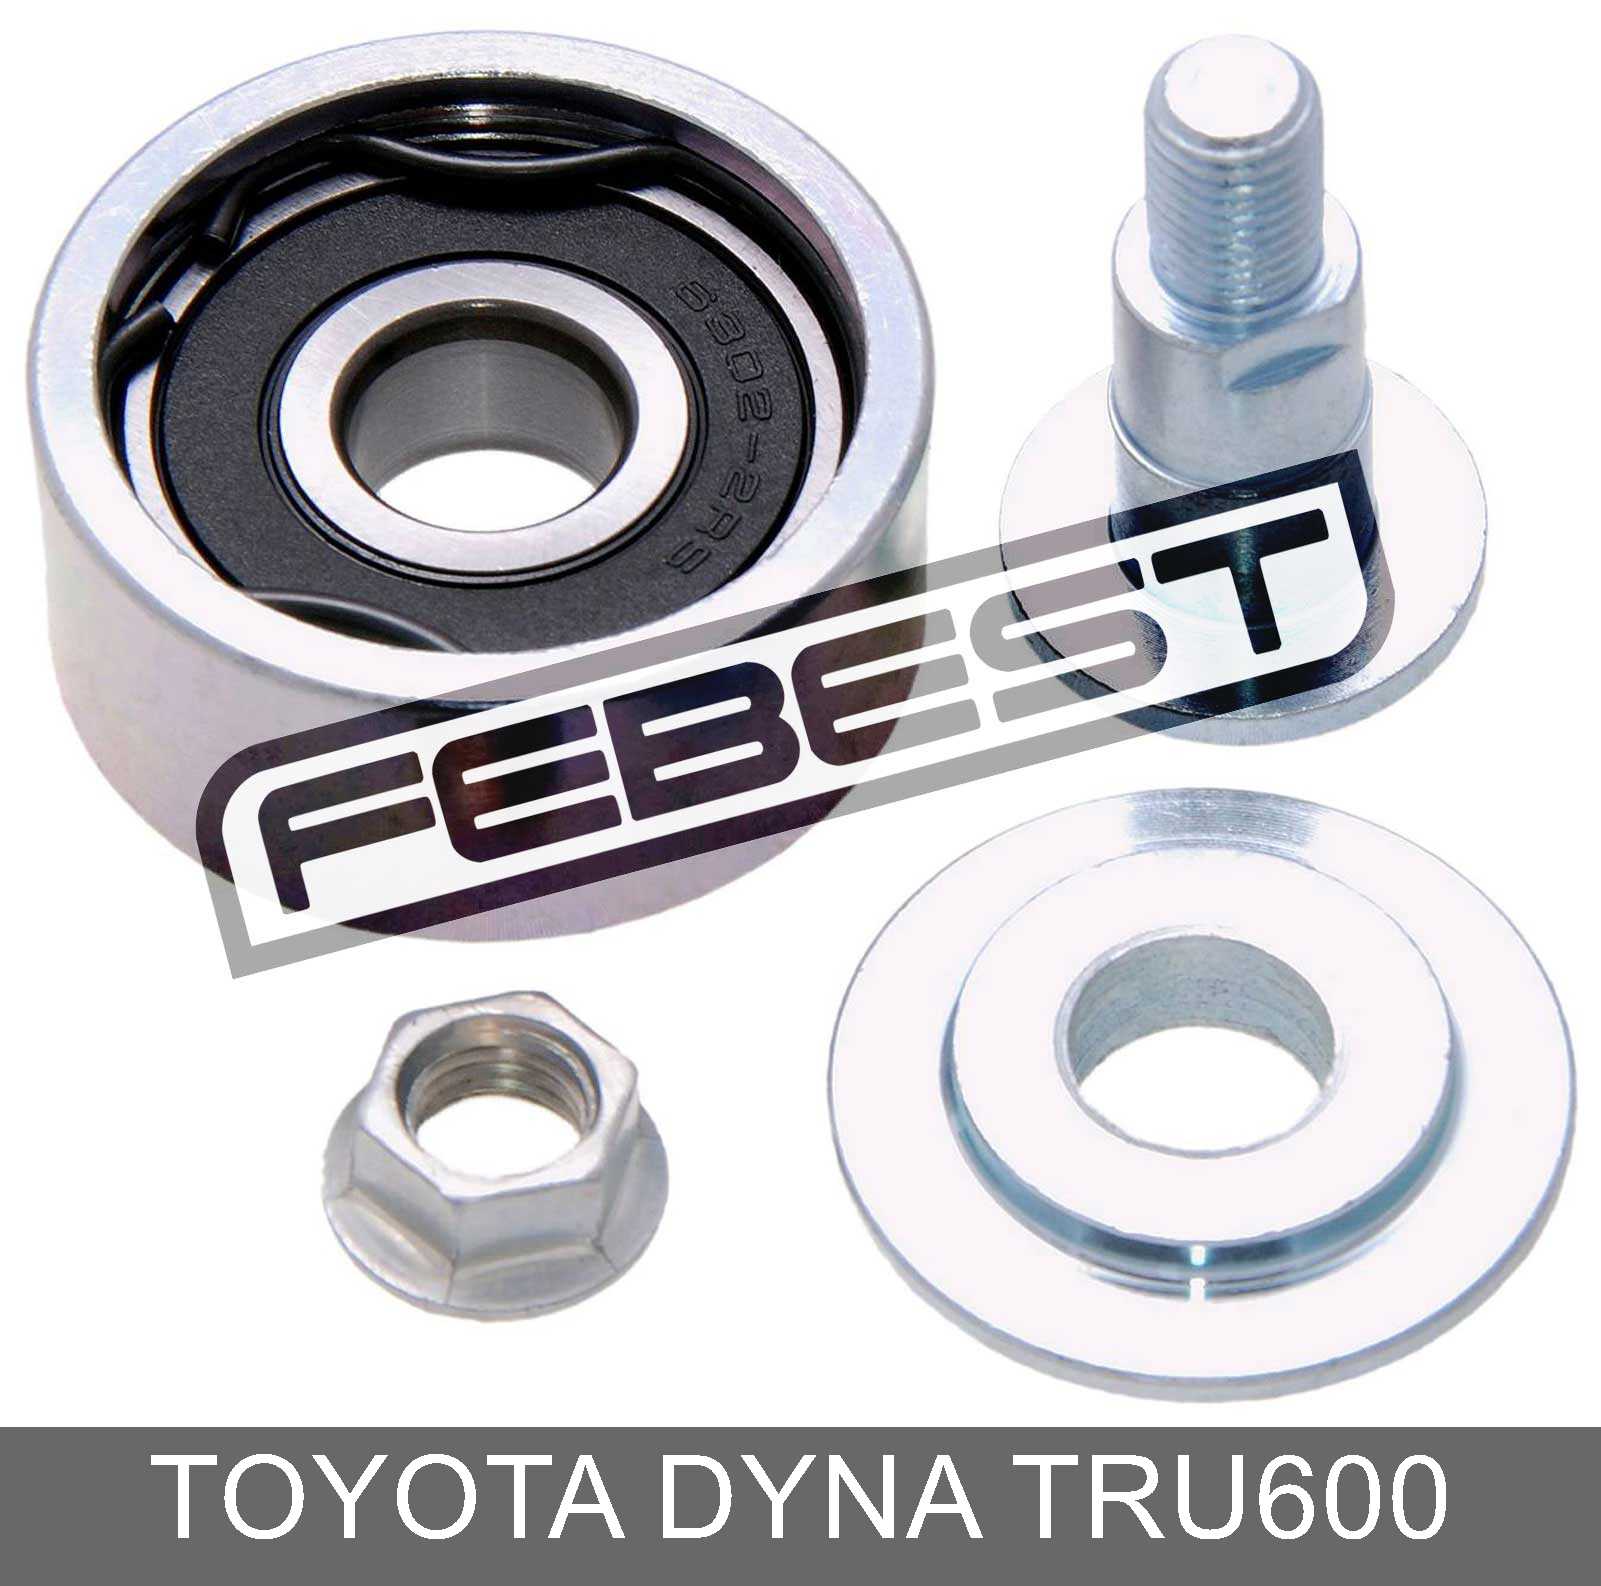 TOYOTA 0188-LJ150_CCY Product Photo